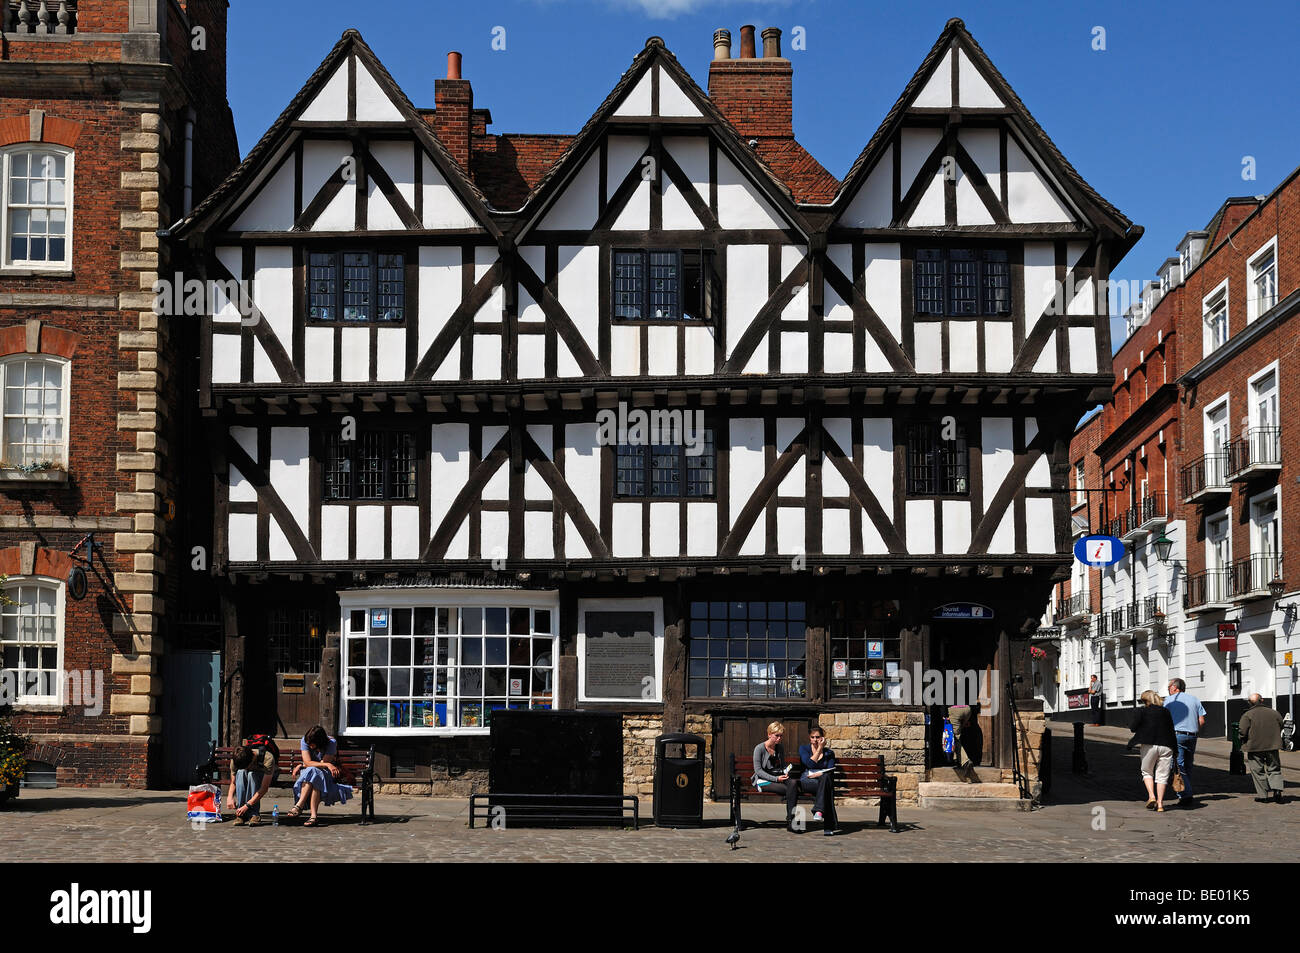 Old half-timbered Tudor-style building, built from 1485 to 1603, Steep Hill, Lincoln, Lincolnshire, England, UK, Europe Stock Photo